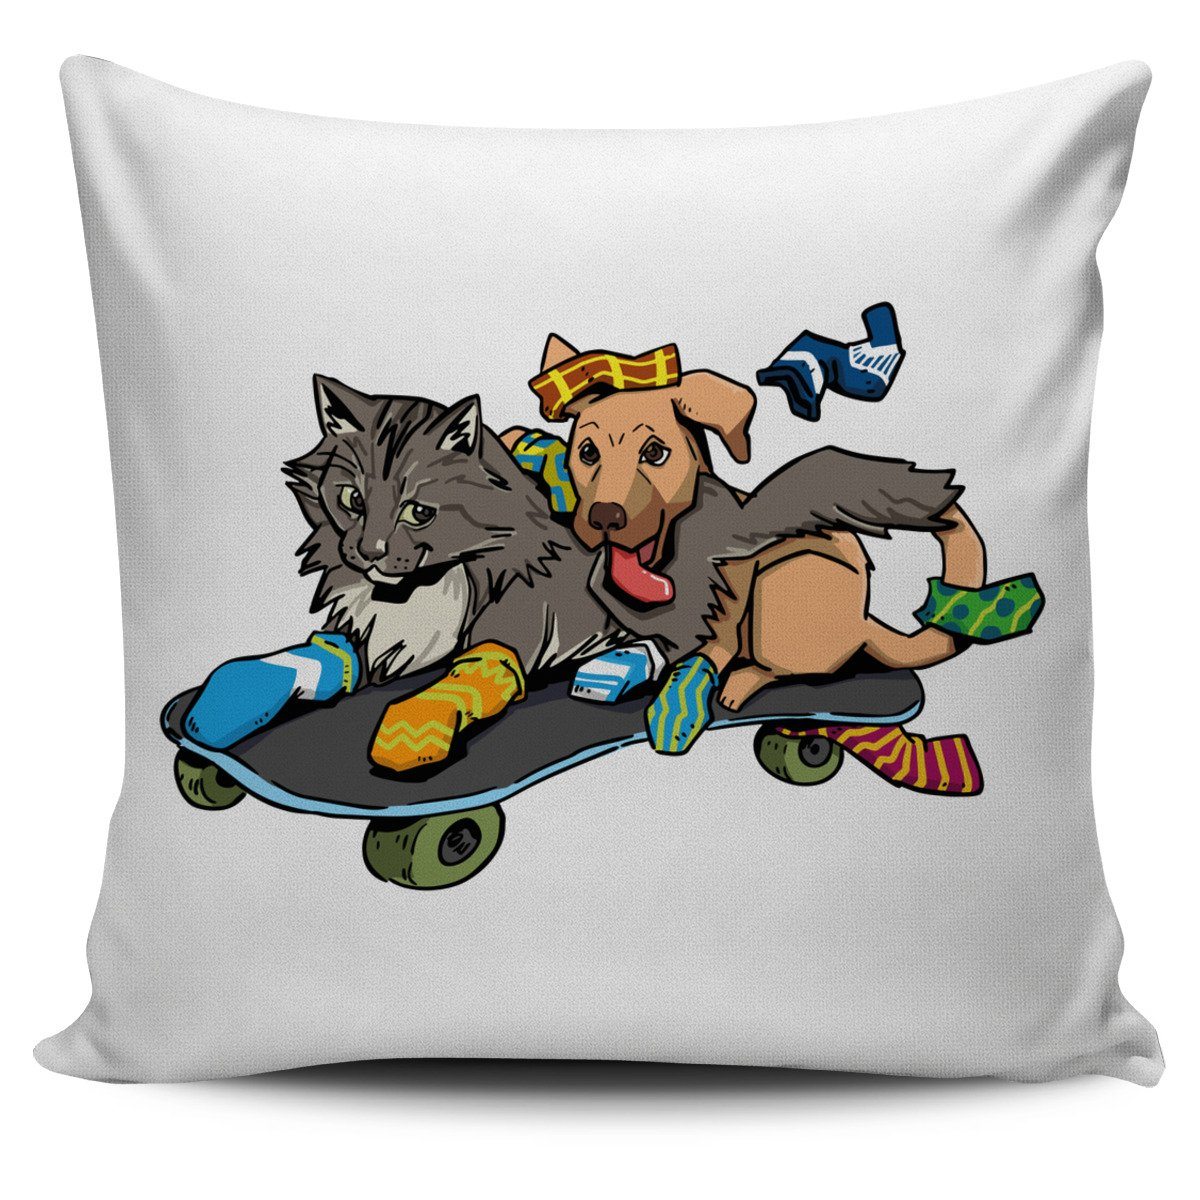 Pillow Cover - Skateboarding Cat and Dog